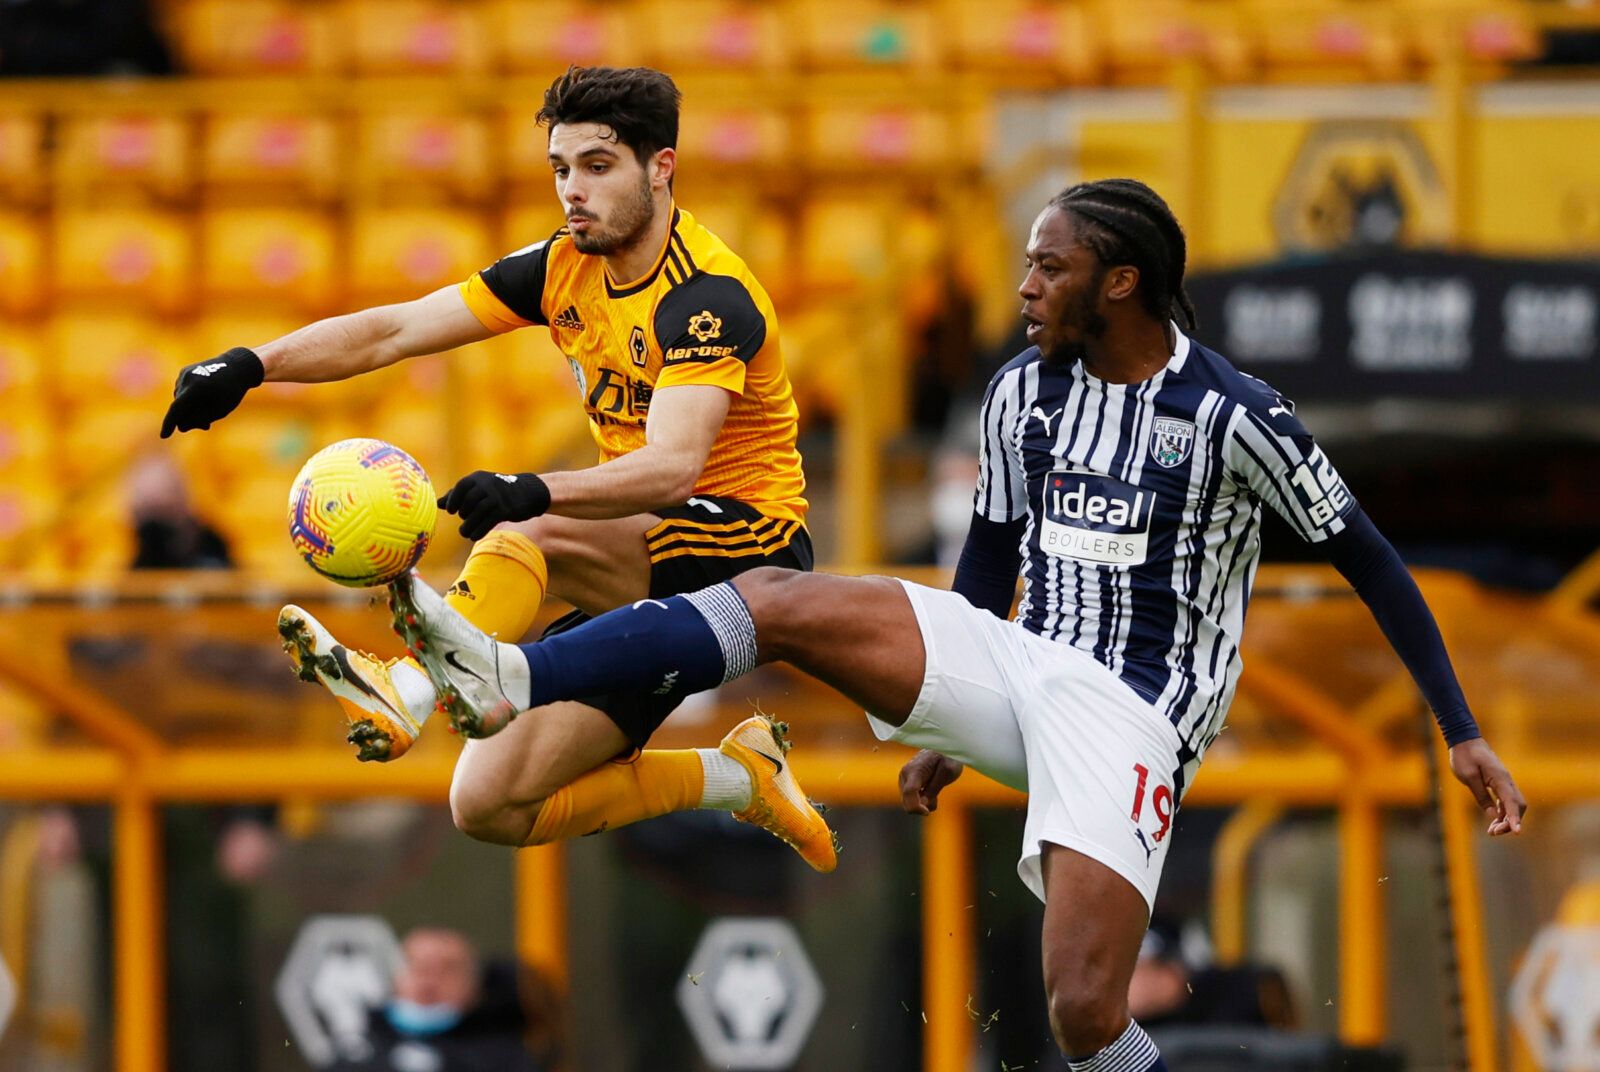 Soccer Football - Premier League - Wolverhampton Wanderers v West Bromwich Albion - Molineux Stadium, Wolverhampton, Britain - January 16, 2021 Wolverhampton Wanderers' Pedro Neto in action with West Bromwich Albion's Romaine Sawyers Pool via REUTERS/Adrian Dennis EDITORIAL USE ONLY. No use with unauthorized audio, video, data, fixture lists, club/league logos or 'live' services. Online in-match use limited to 75 images, no video emulation. No use in betting, games or single club /league/player 